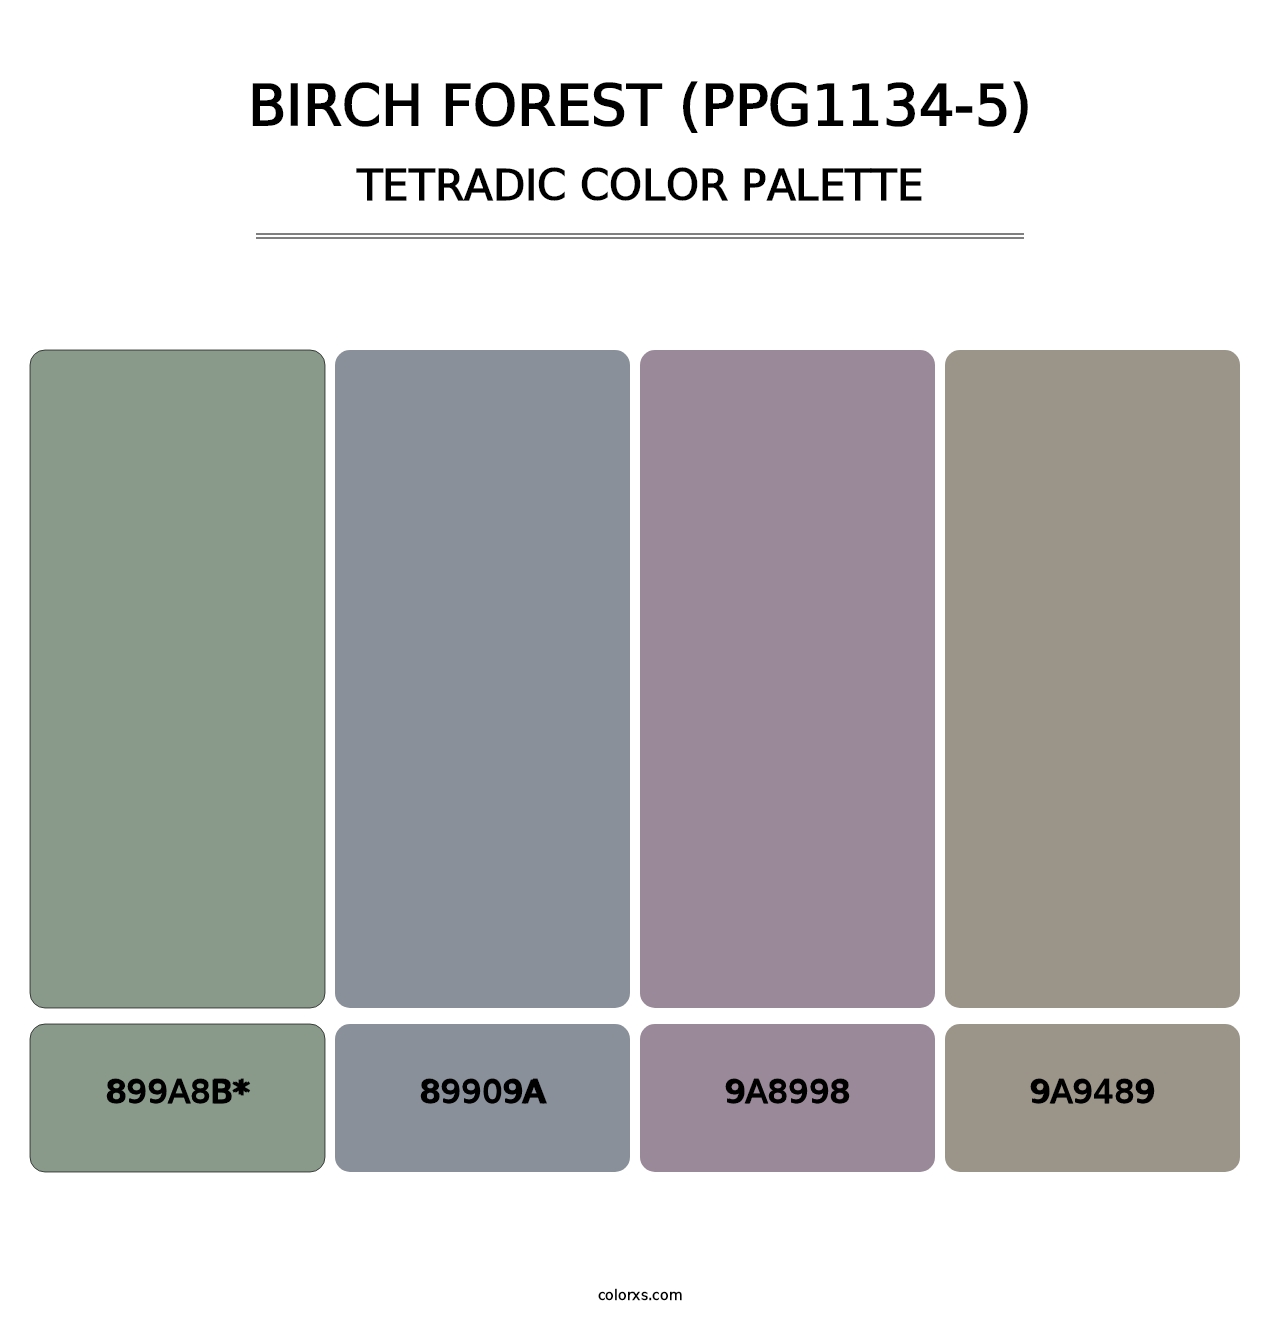 Birch Forest (PPG1134-5) - Tetradic Color Palette